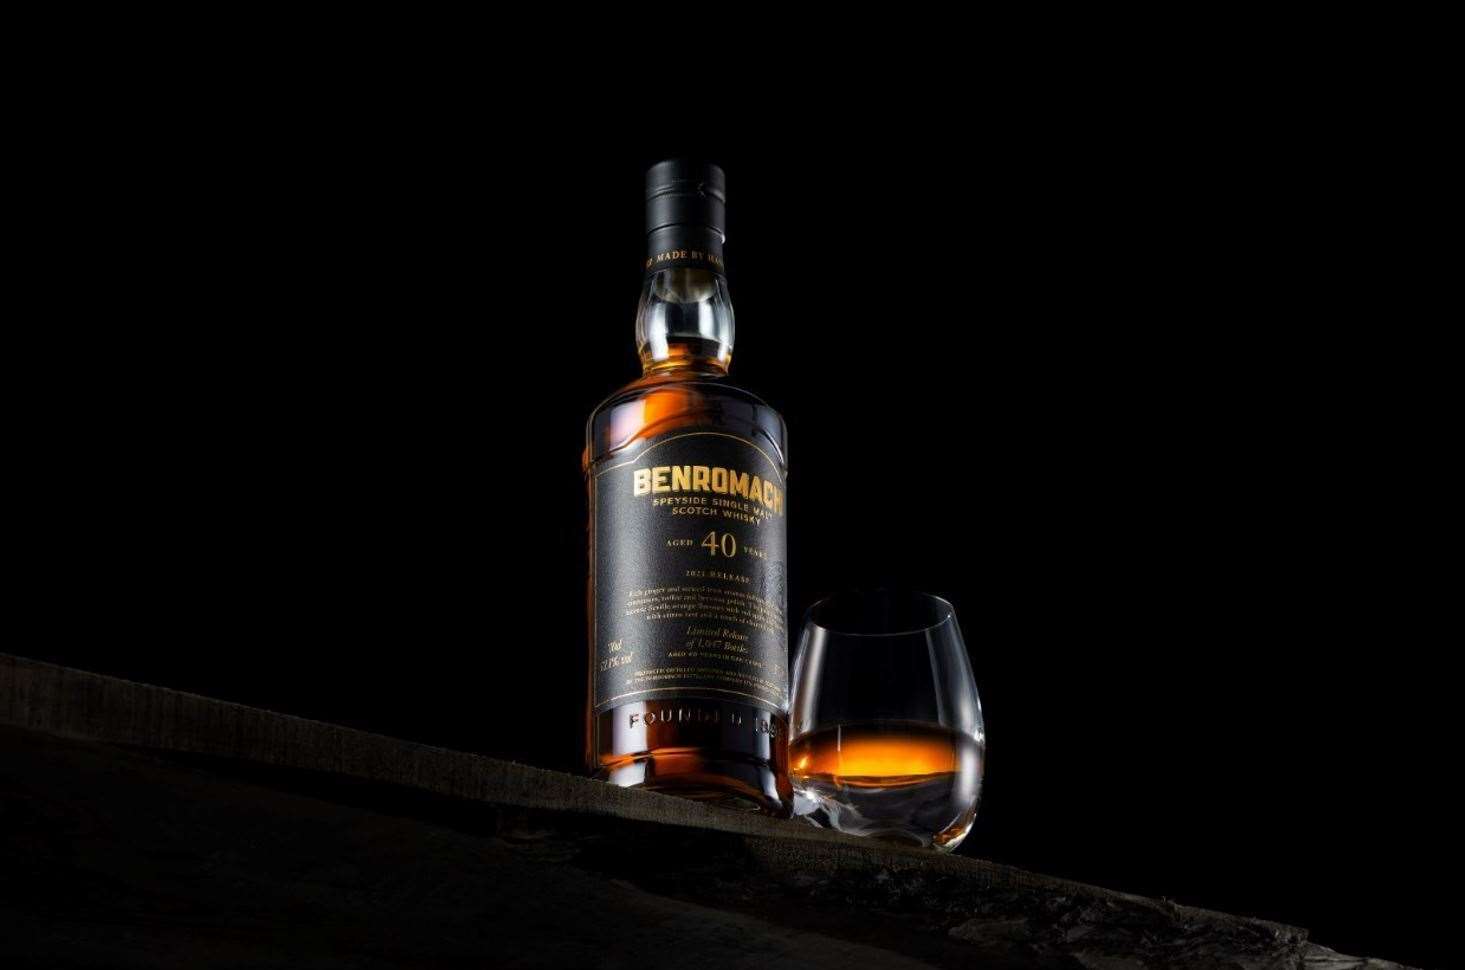 Benromach's 40 Year Old Single Malt has been named 'Best in Show' at the San Francisco World Spirits Competition.